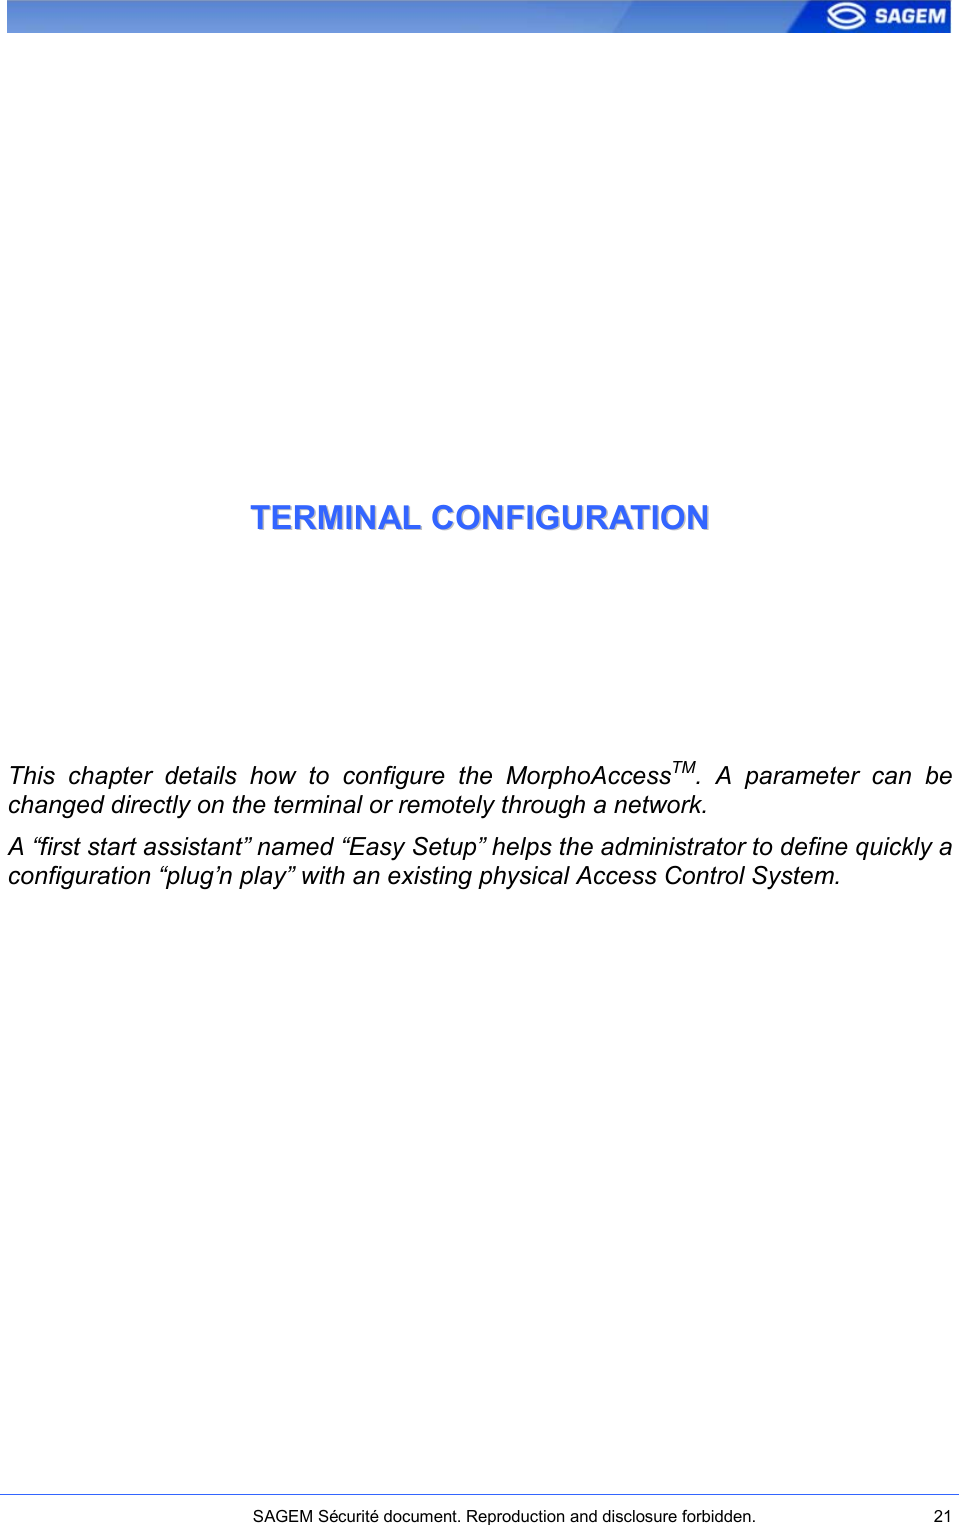    SAGEM Sécurité document. Reproduction and disclosure forbidden.  21  TTEERRMMIINNAALL  CCOONNFFIIGGUURRAATTIIOONN  This  chapter  details  how  to  configure  the  MorphoAccessTM.  A  parameter  can  be changed directly on the terminal or remotely through a network. A “first start assistant” named “Easy Setup” helps the administrator to define quickly a configuration “plug’n play” with an existing physical Access Control System.  